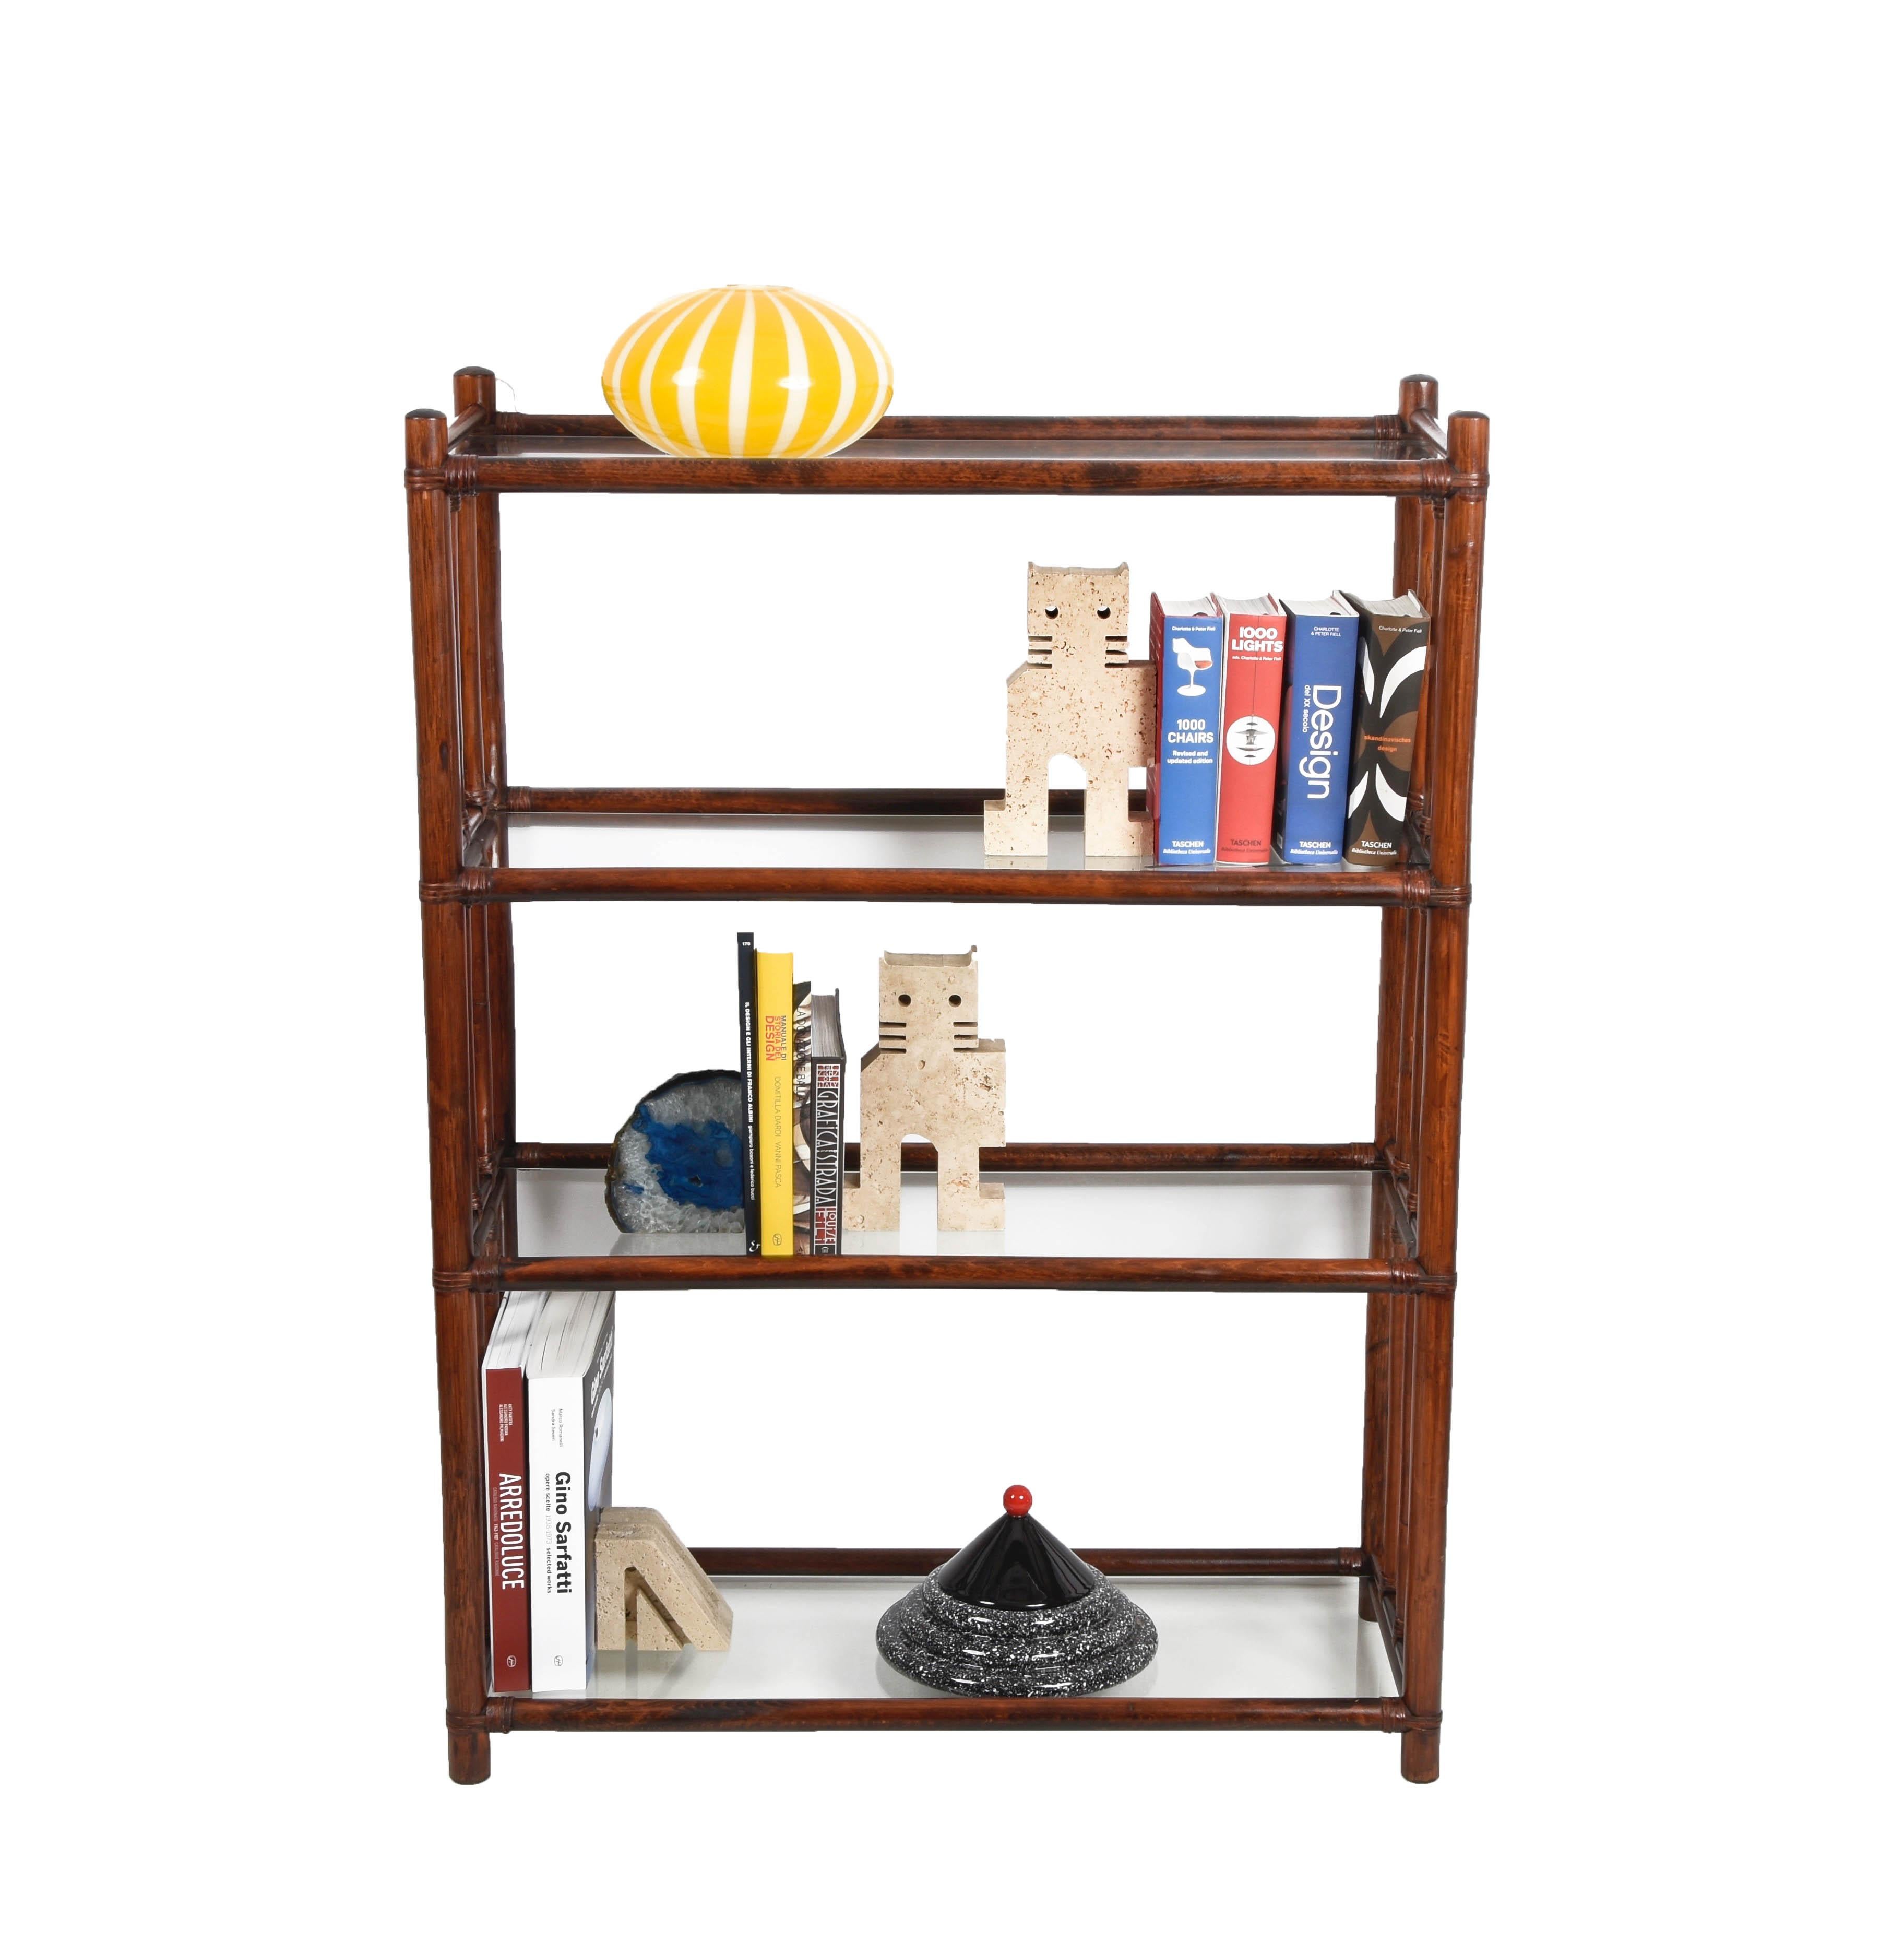 Midcentury Rattan Italian Bookcase with Four Crystal Glass Shelves, 1960s For Sale 1